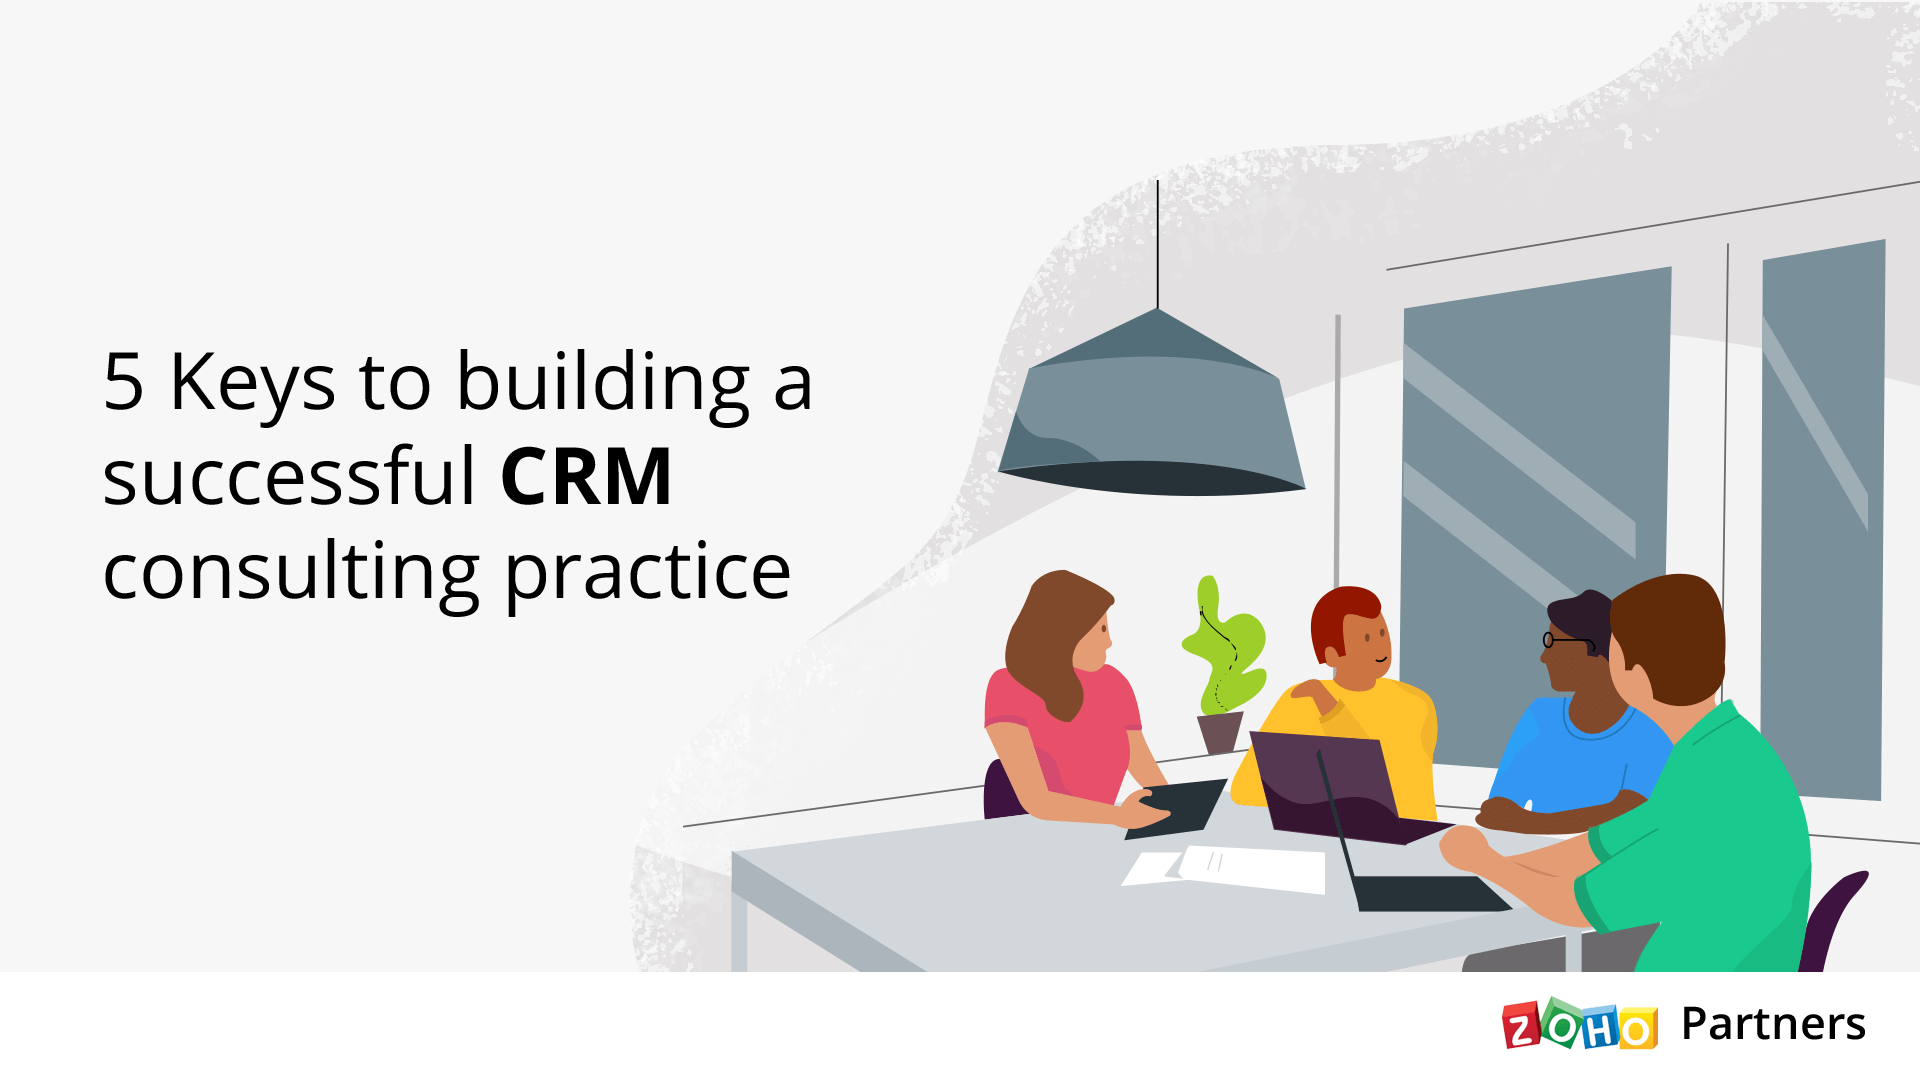 5 keys to building a successful CRM consulting practice